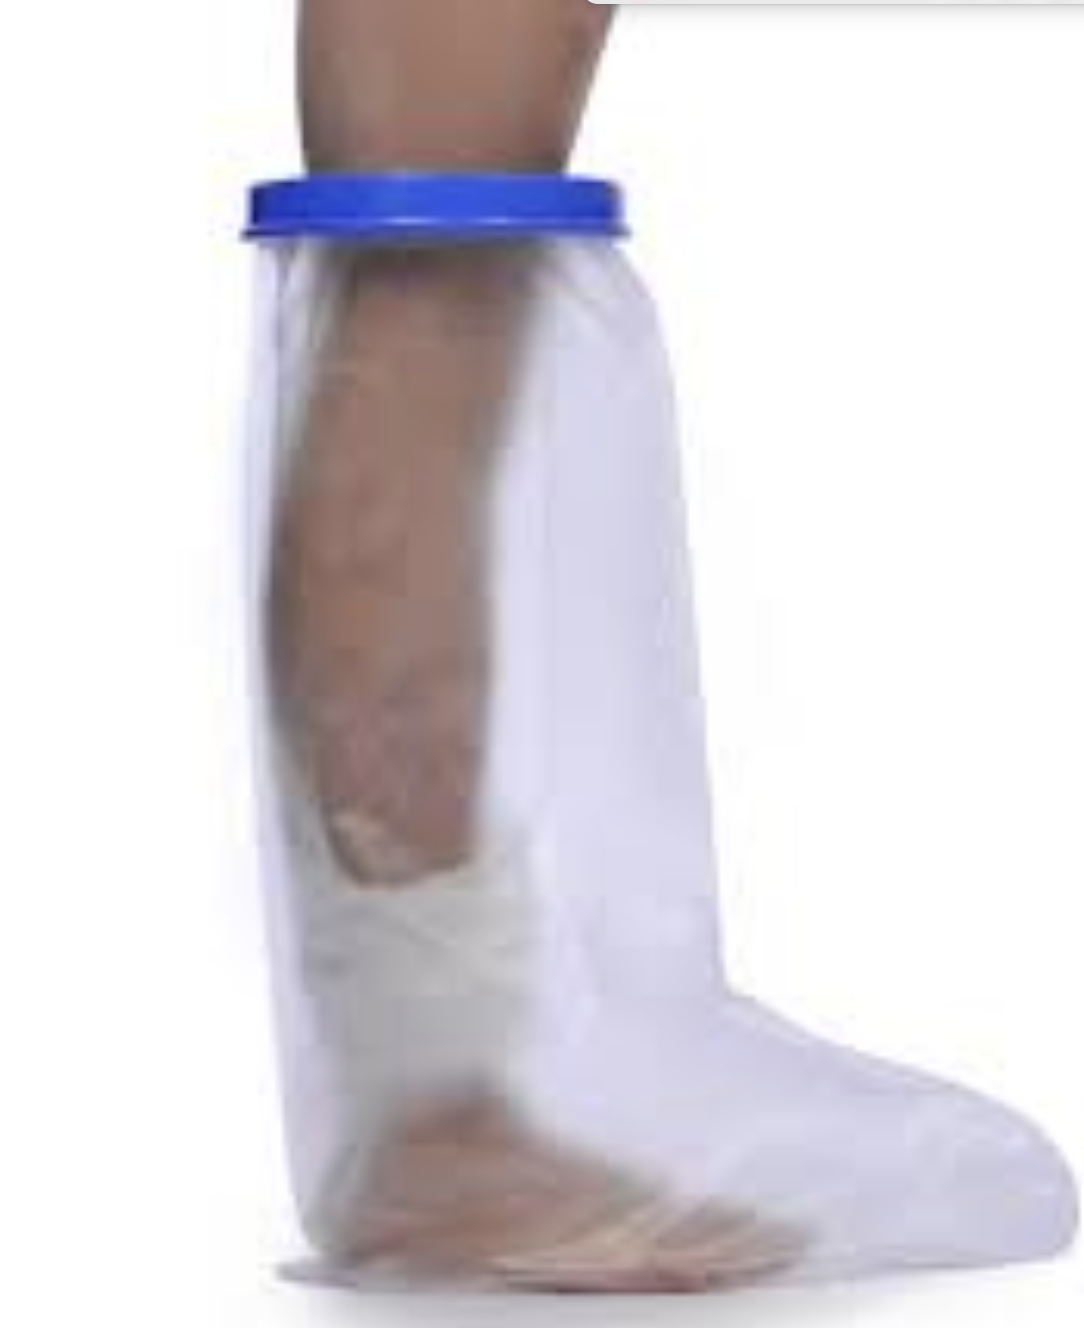 Wound and plaster protection